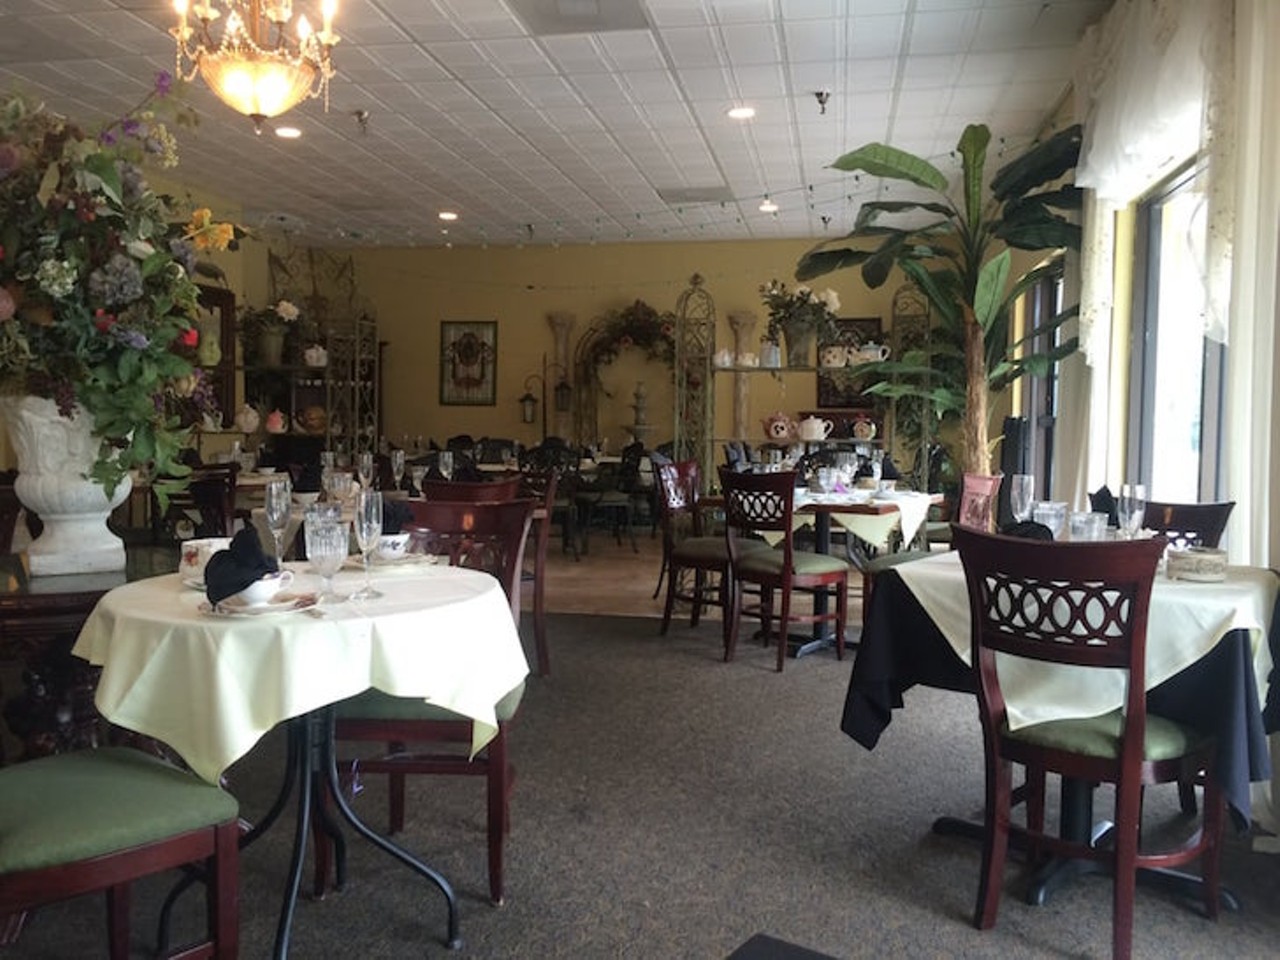 The Empress Tea Room  
2924 N. Dale Mabry Highway, Tampa, 813-988-9027
This weekend-only high tea room is perfect for an afternoon brunch. There are a variety of dining options for your tea experience and this elegant atmosphere will make you feel exactly like an empress. 
Photo via Yelp/M.S.